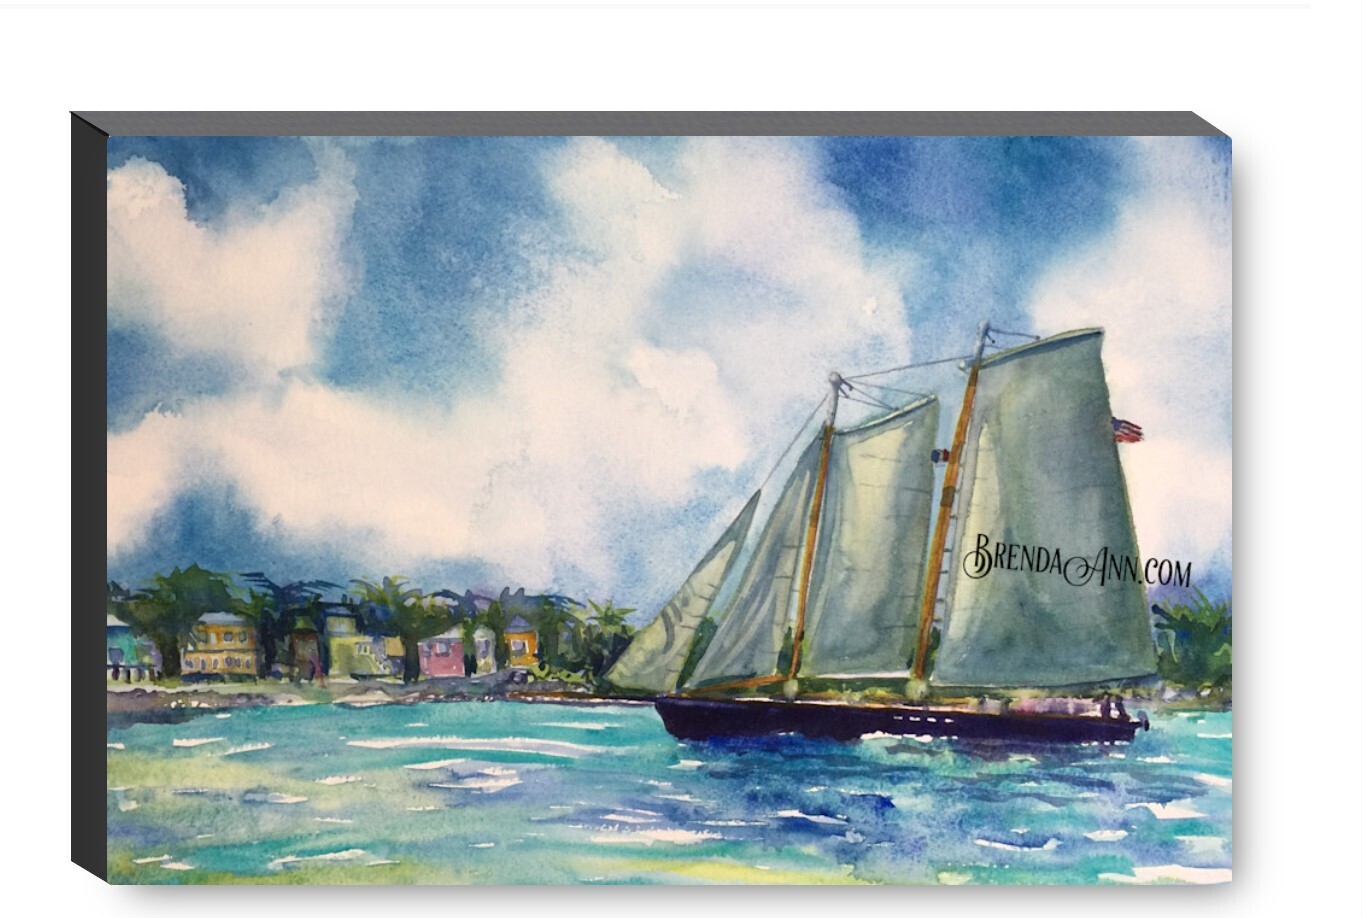 Schooner America Key West Canvas Gallery Wrapped Print - Watercolor Art - Ready to hang on a wall